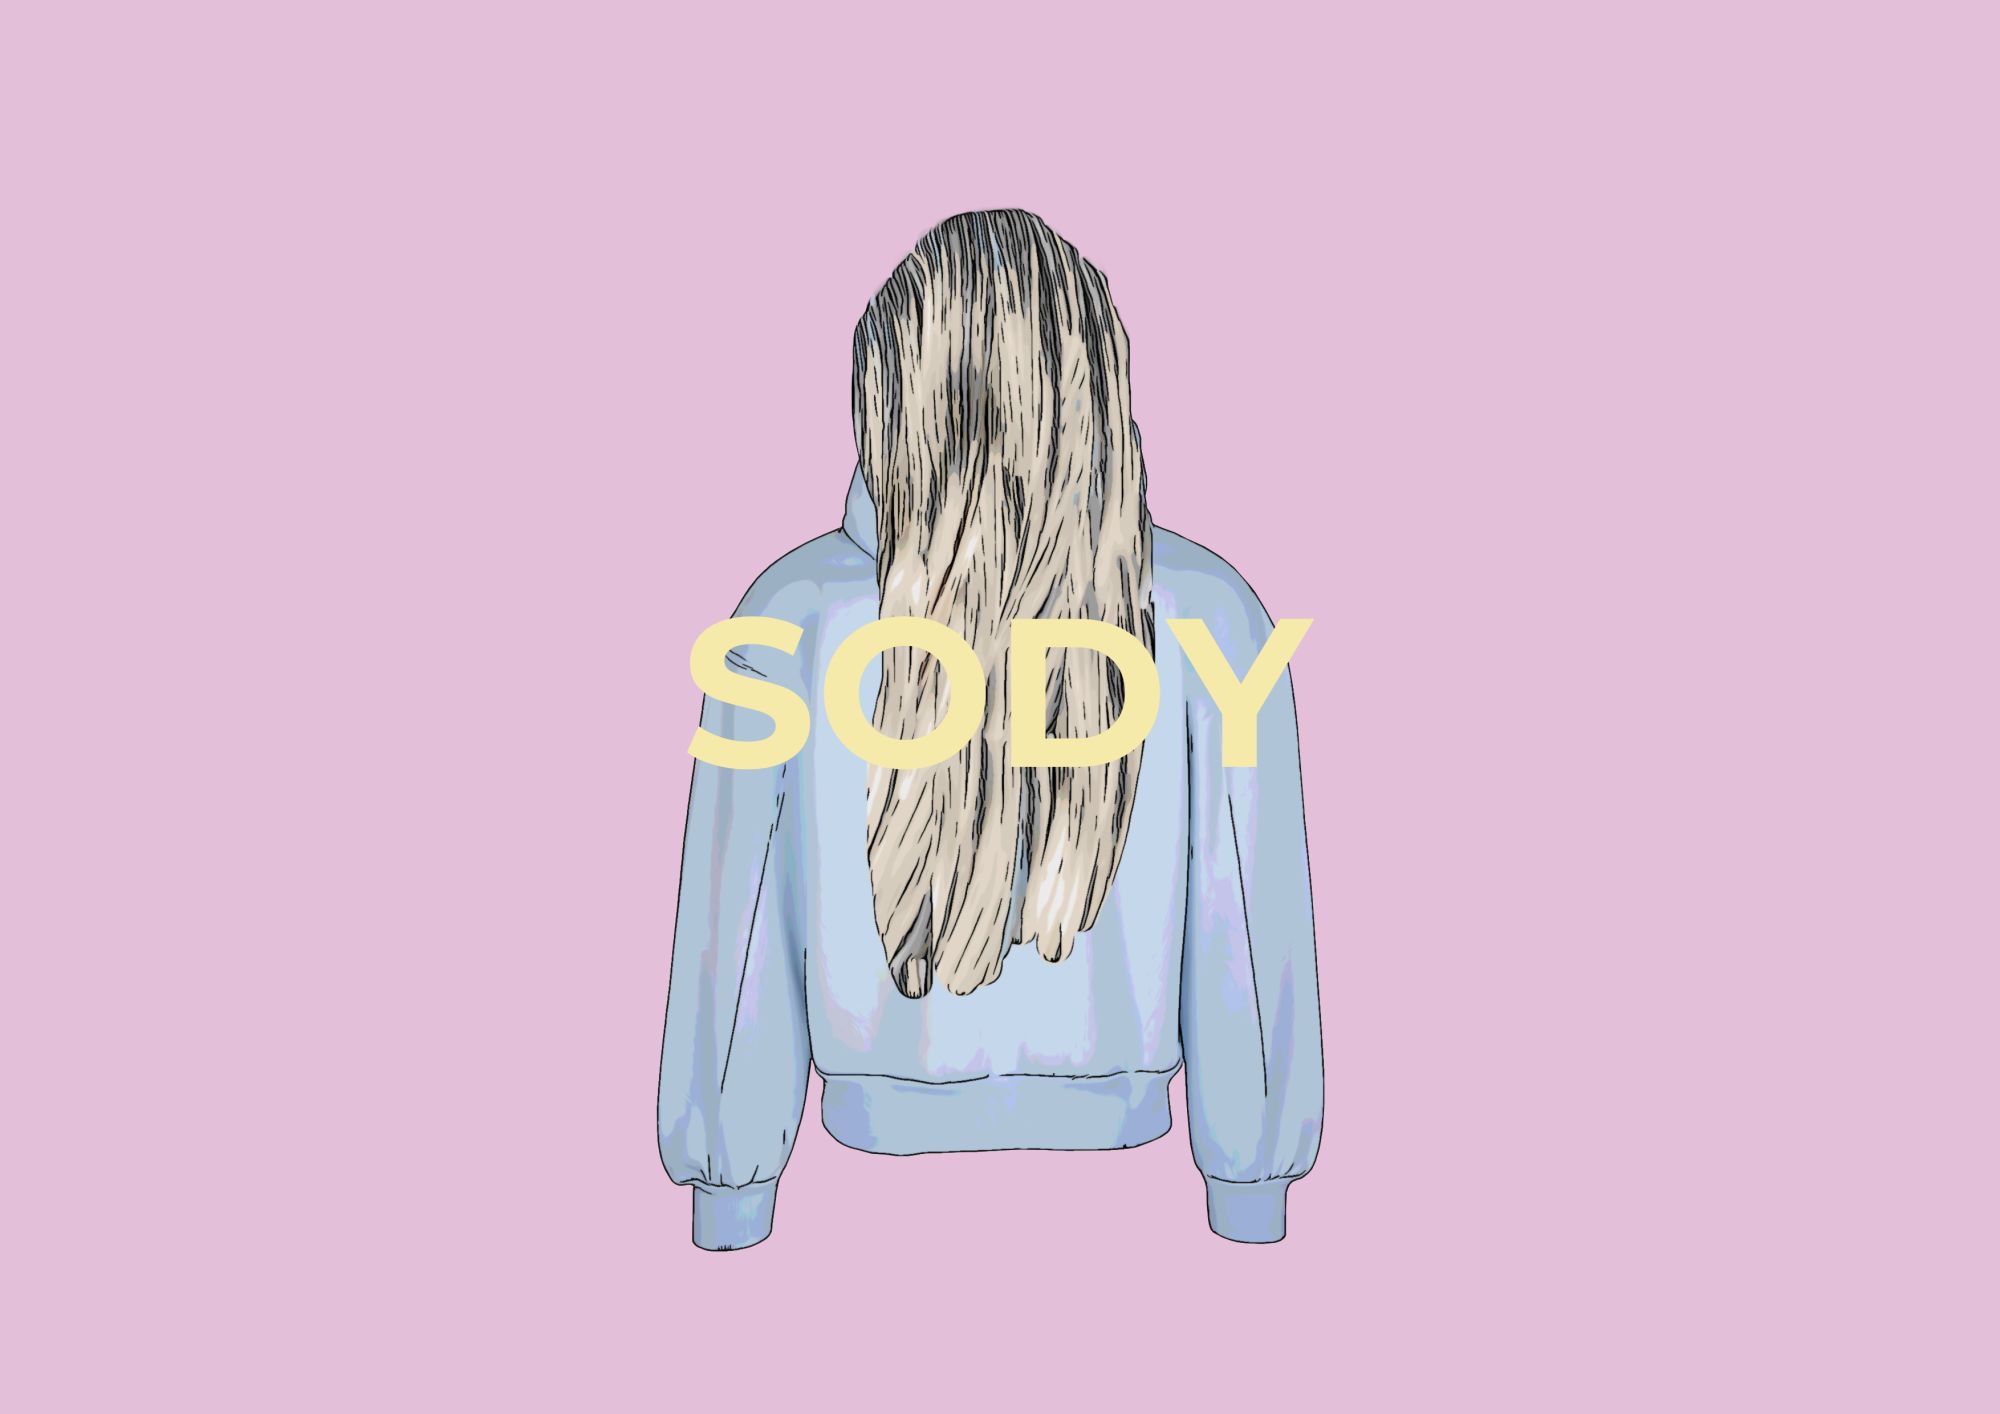 Graphic design image of Sody's pale blue hoodie and long blonde hair.